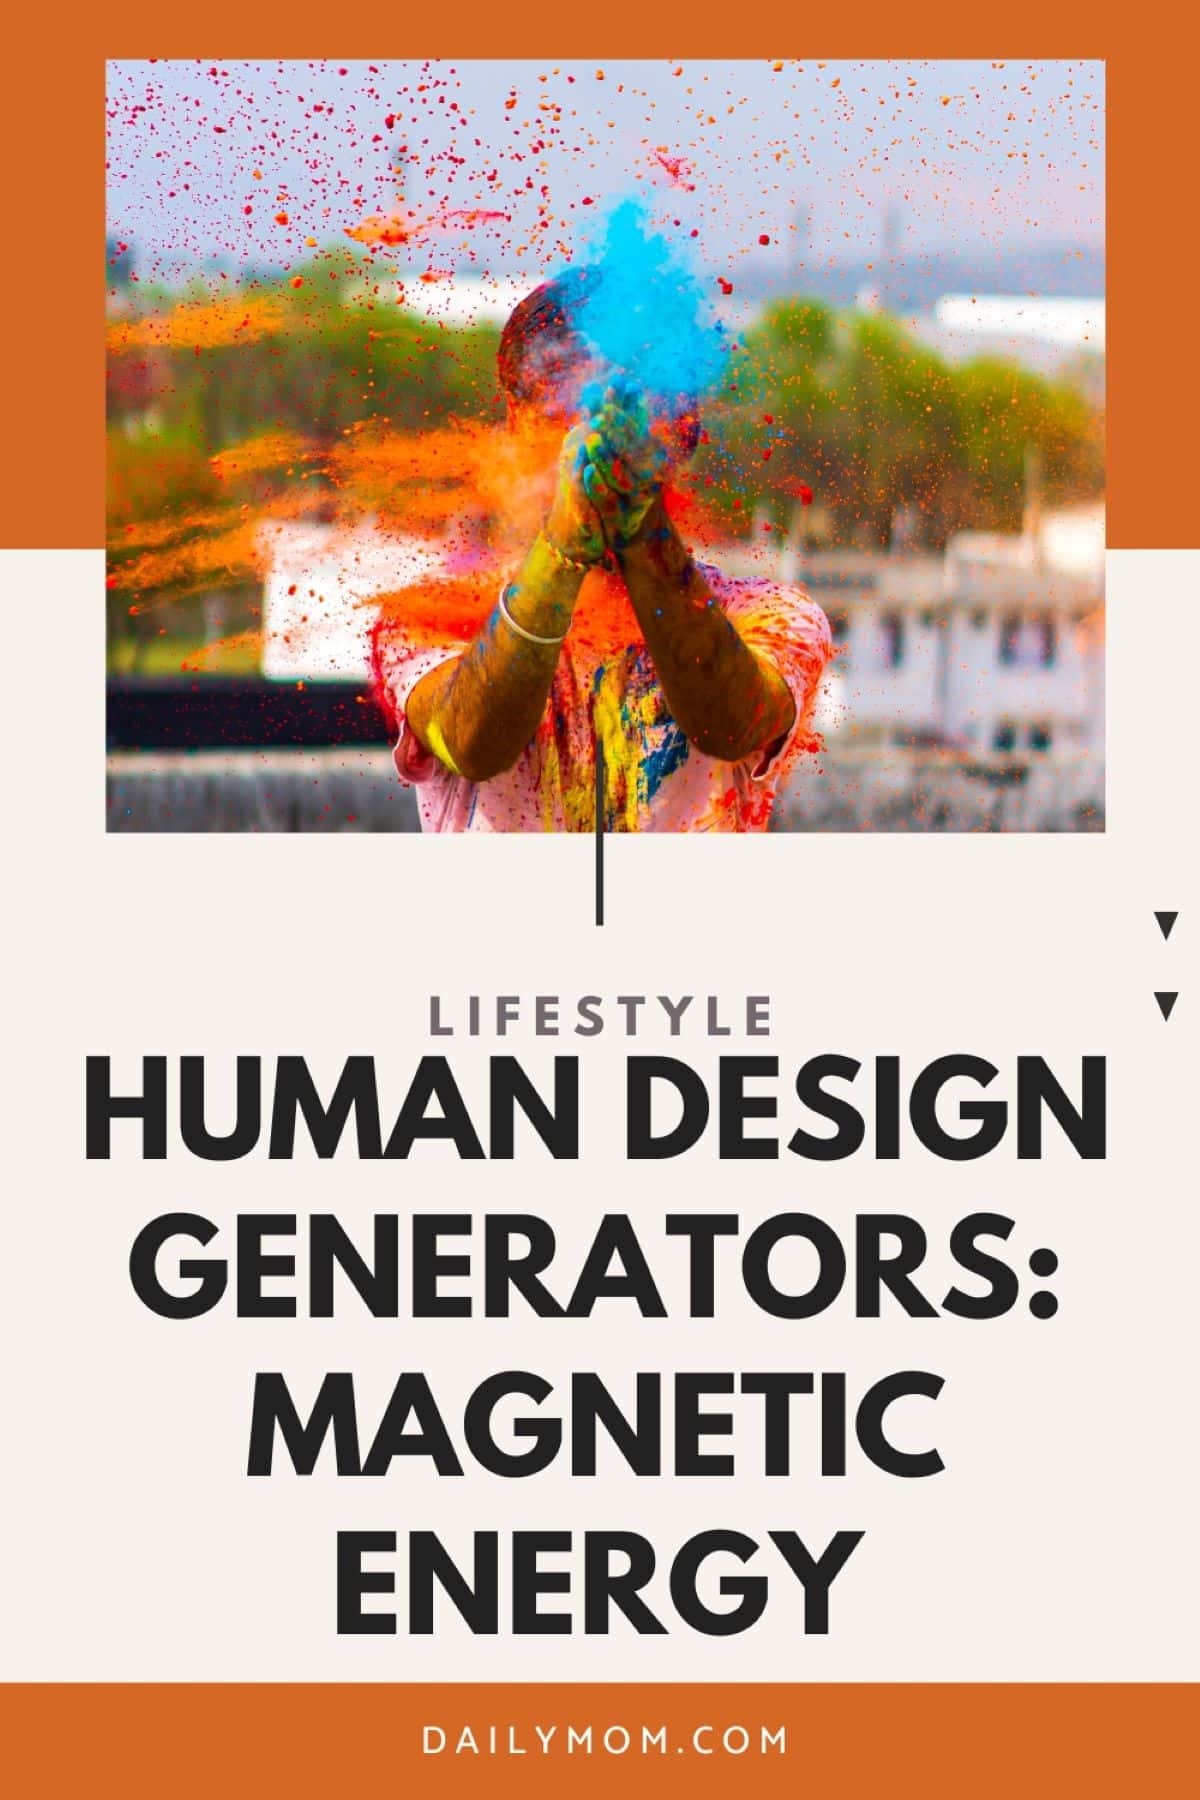 Human Design Generator Types: The Strategy Of These Magnetic Design Types 5 Daily Mom, Magazine For Families